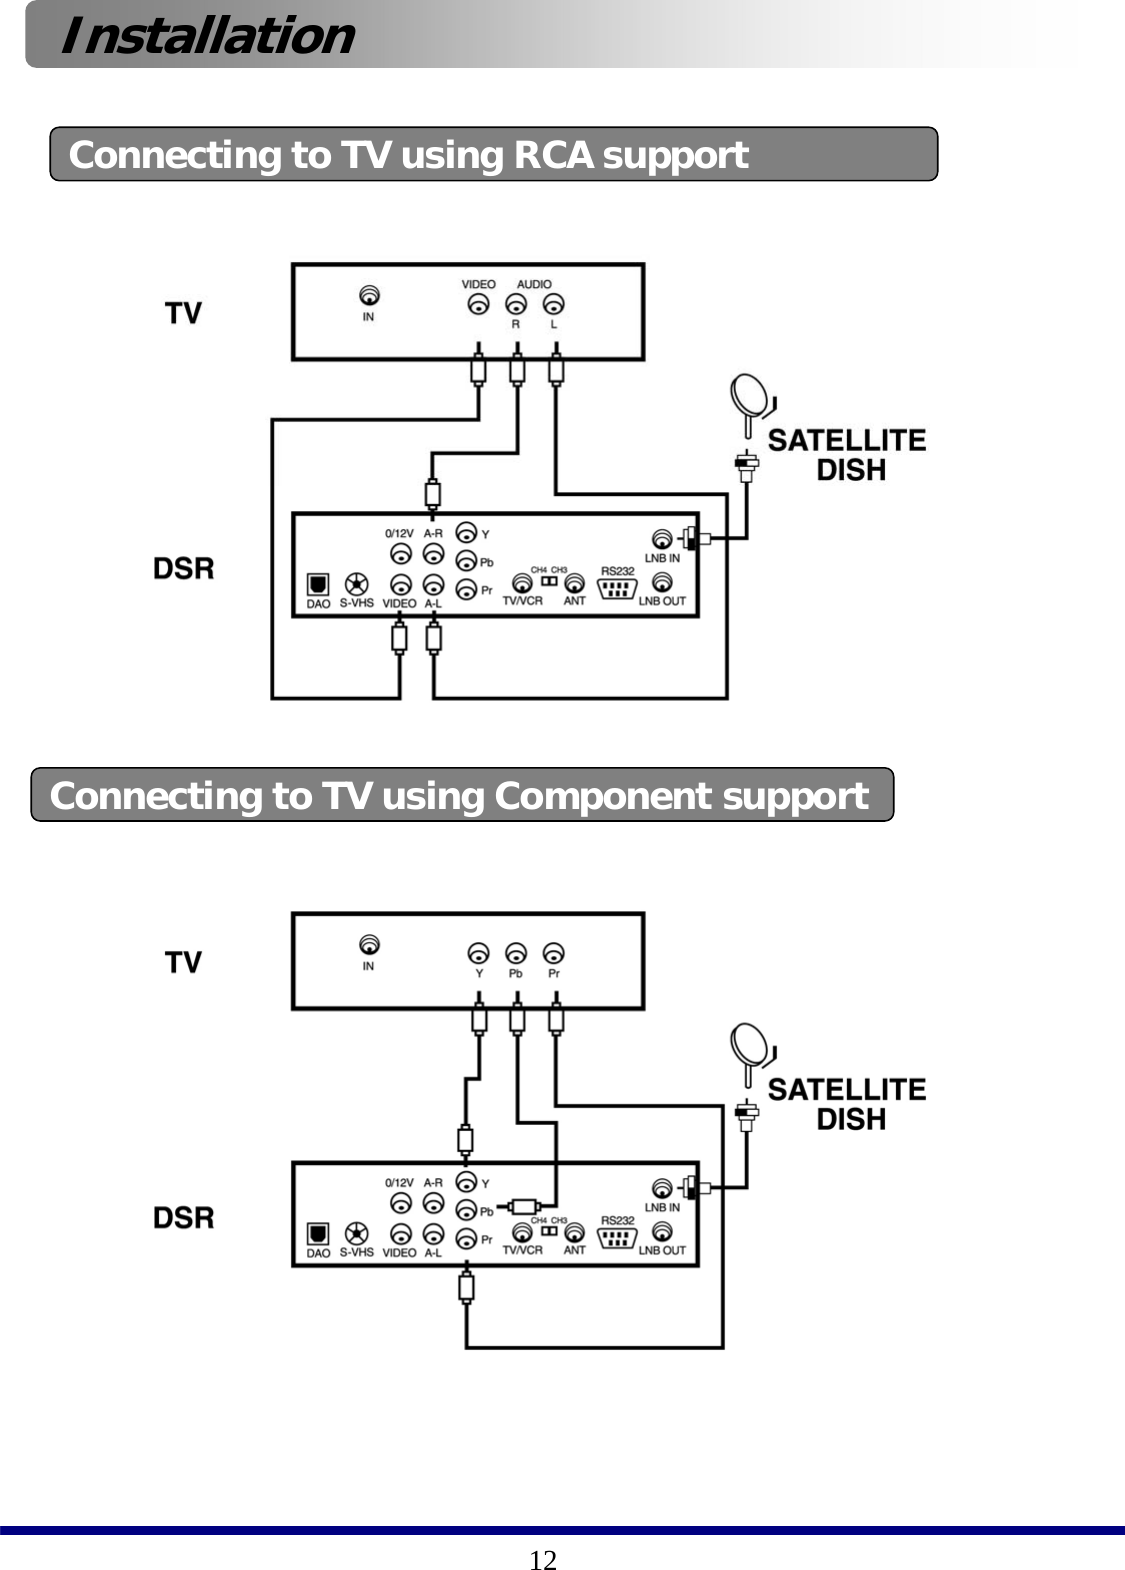 12Connecting to TV using RCA supportInstallationConnecting to TV using Component support